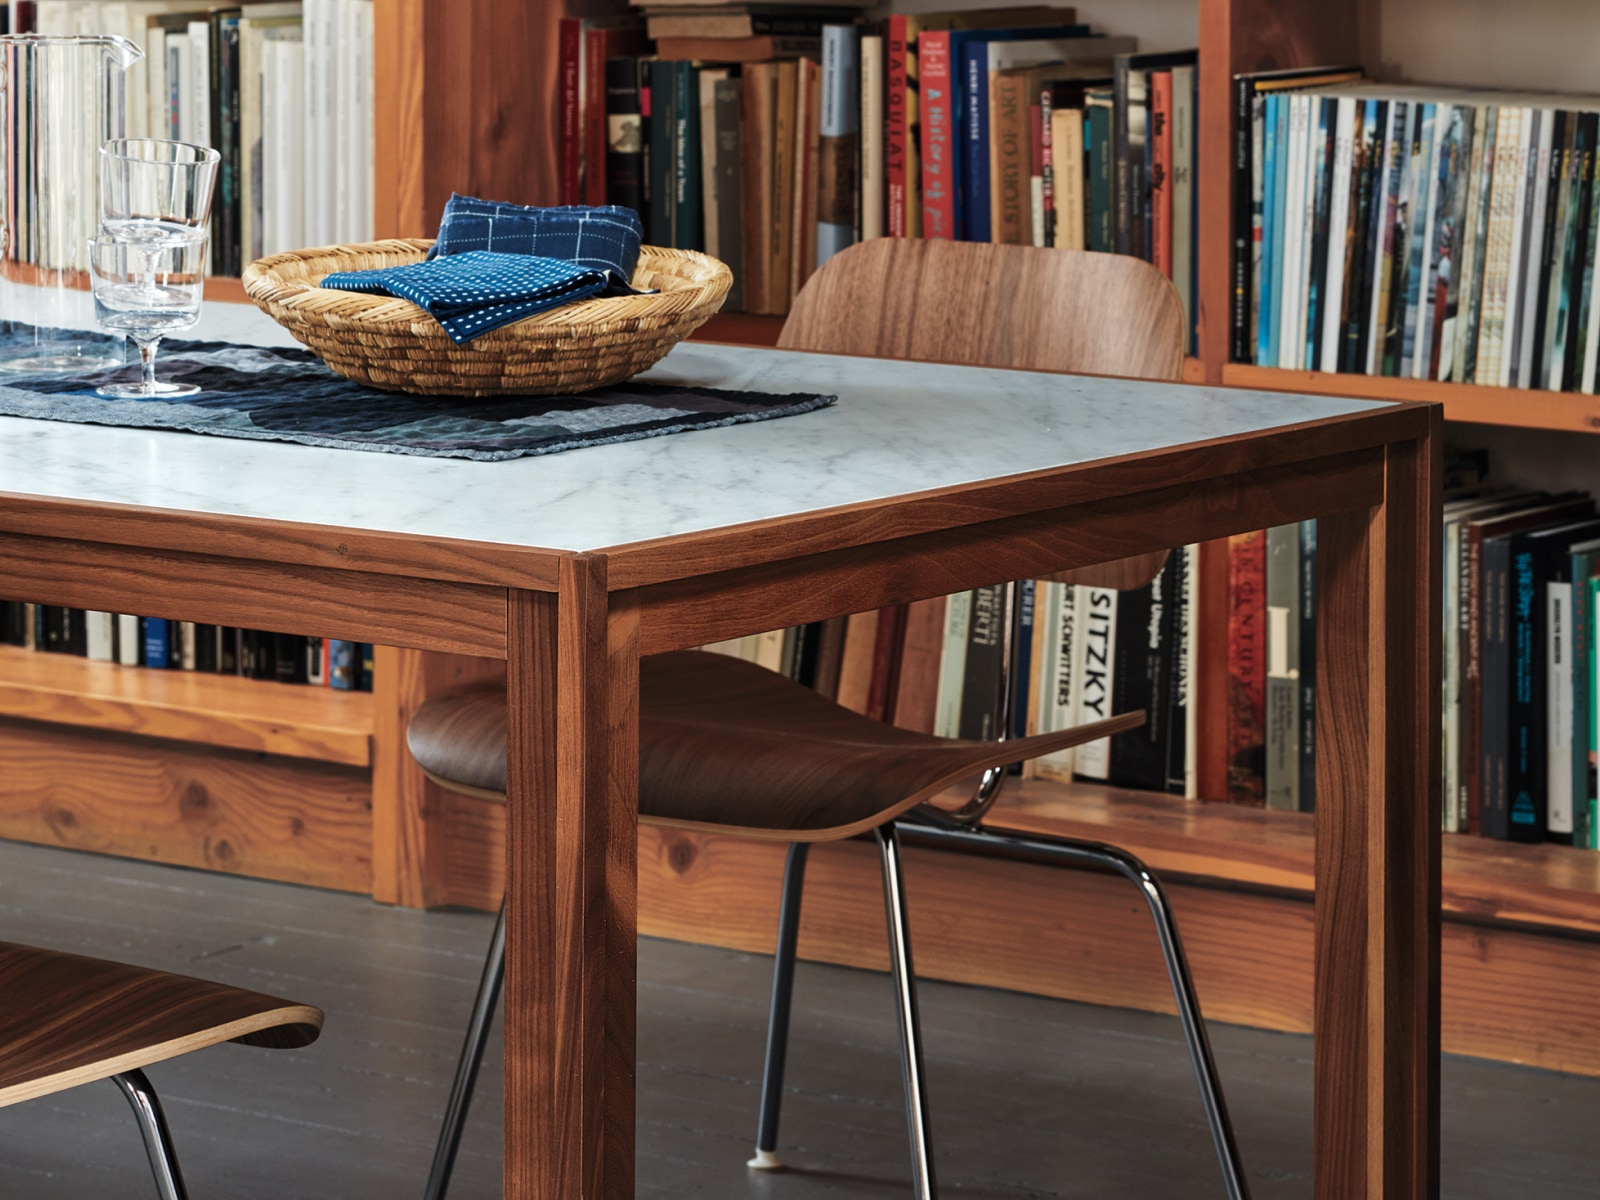 An Eames Moulded Plywood Dining Chair with a metal base sits at a rectangular table with bookshelves in the background.